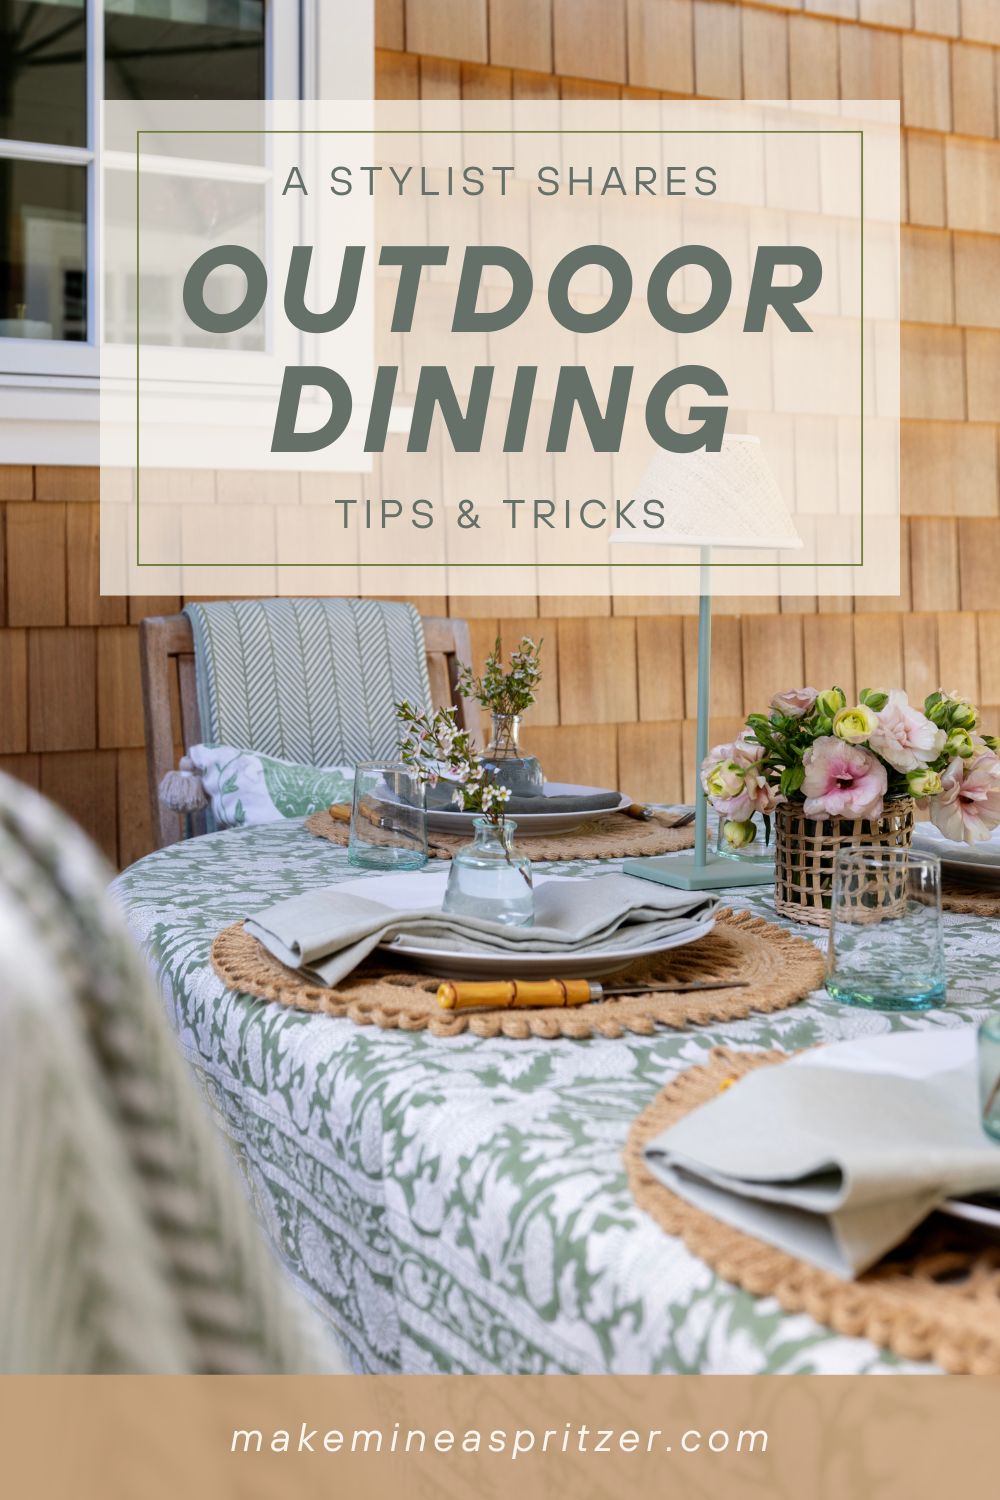 Outdoor Dining tips & tricks pin collage.